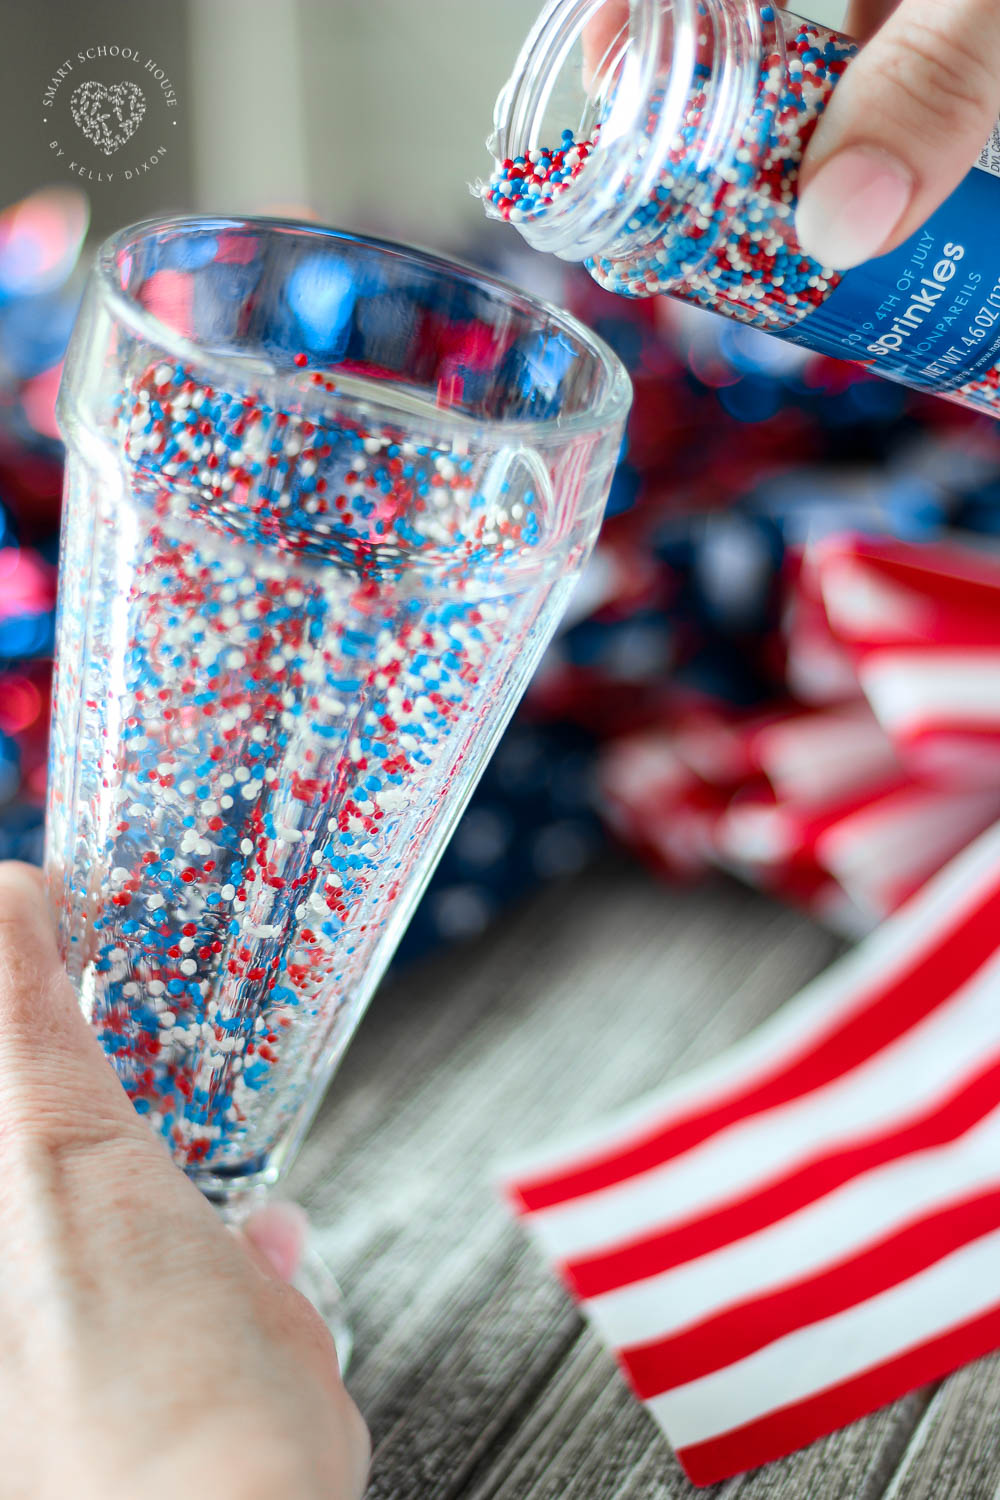 Making a red, white, and blue milkshake for the 4th of July. Here's how to make the sprinkles stick. WOW!